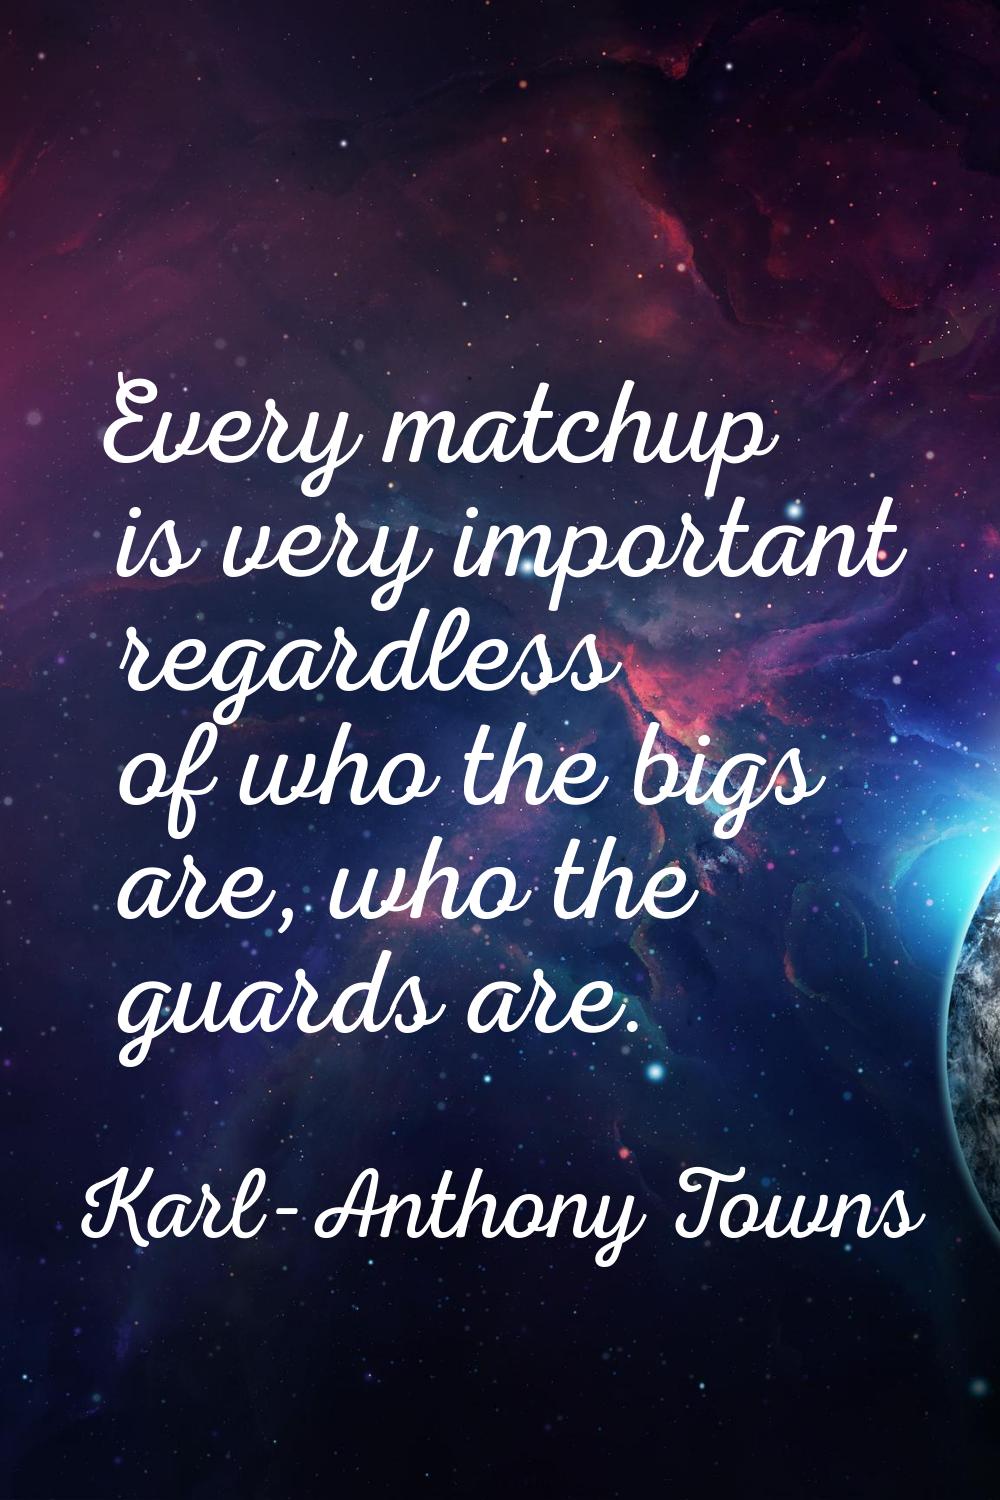 Every matchup is very important regardless of who the bigs are, who the guards are.